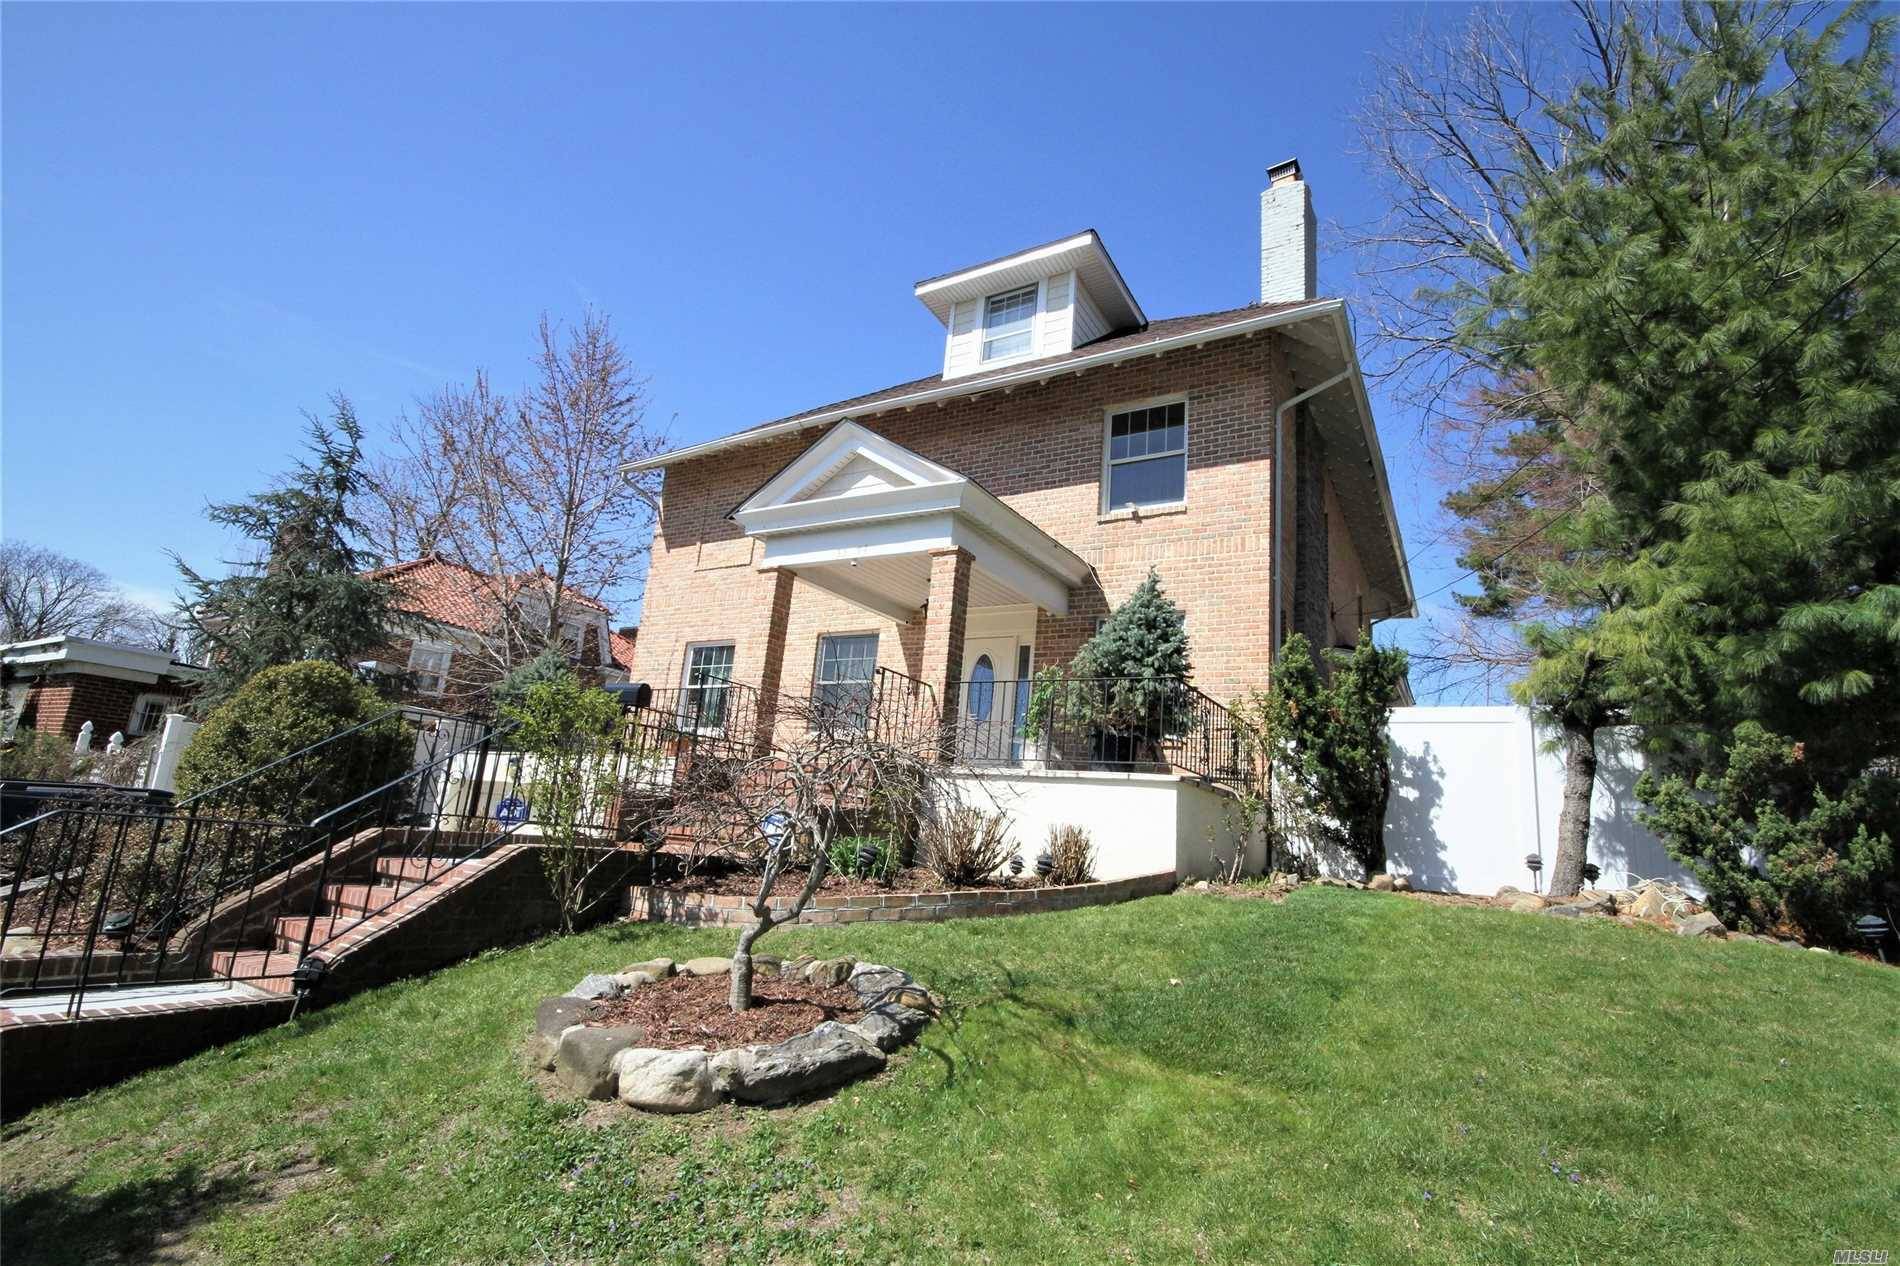 North Flushing, Detached 6-Bedroom Colonial Home On A 60' By 100' Lot.